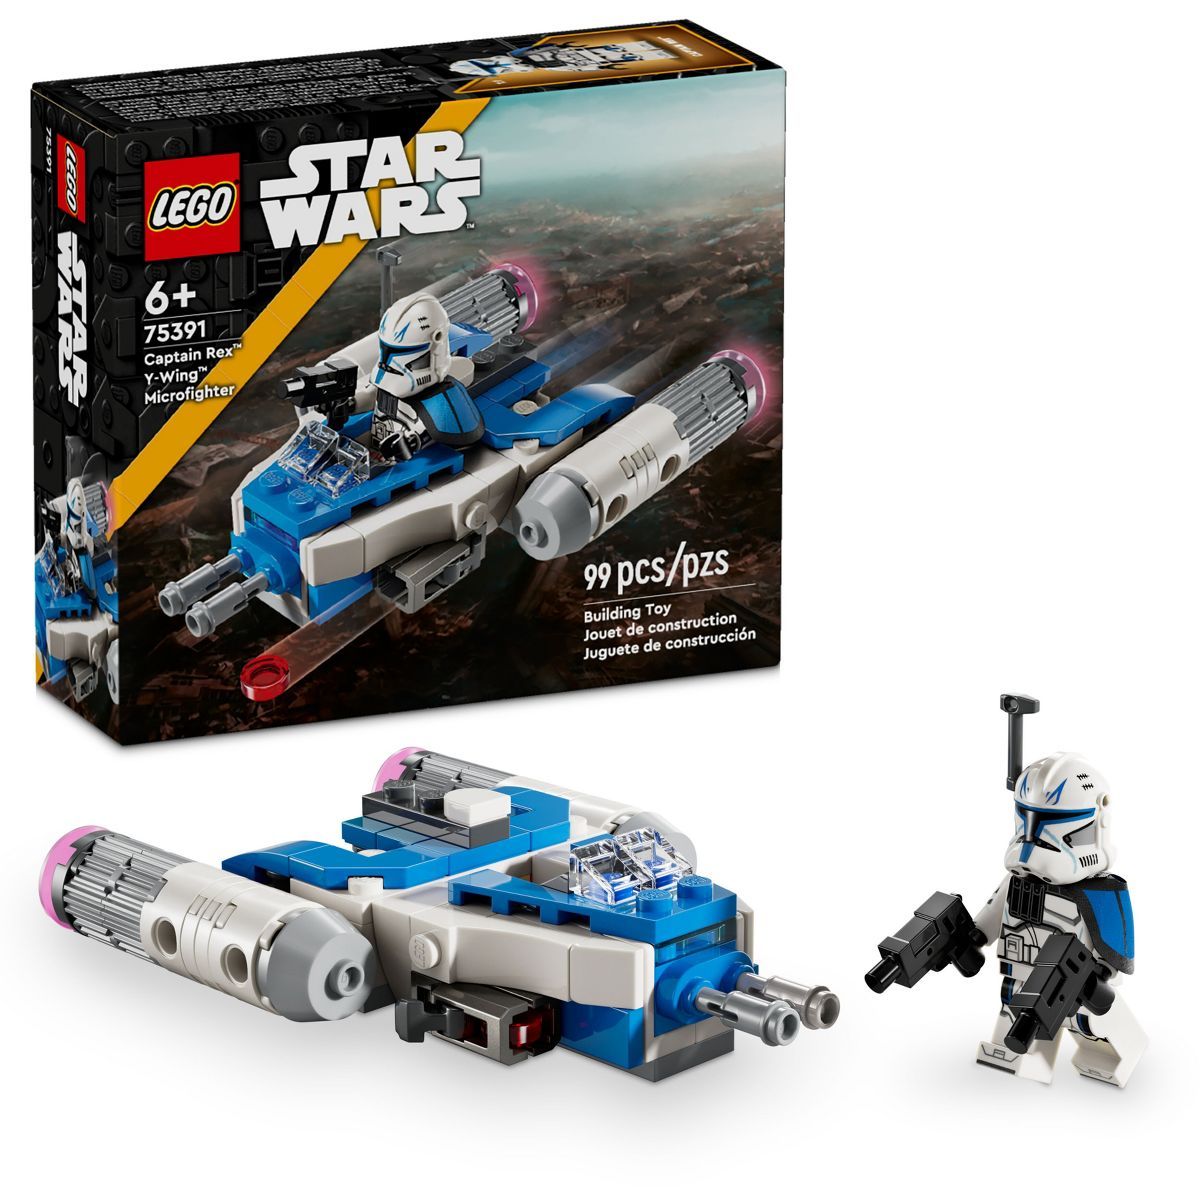 LEGO Star Wars Captain Rex Y-Wing Microfighter Building Toy 75391 | Target